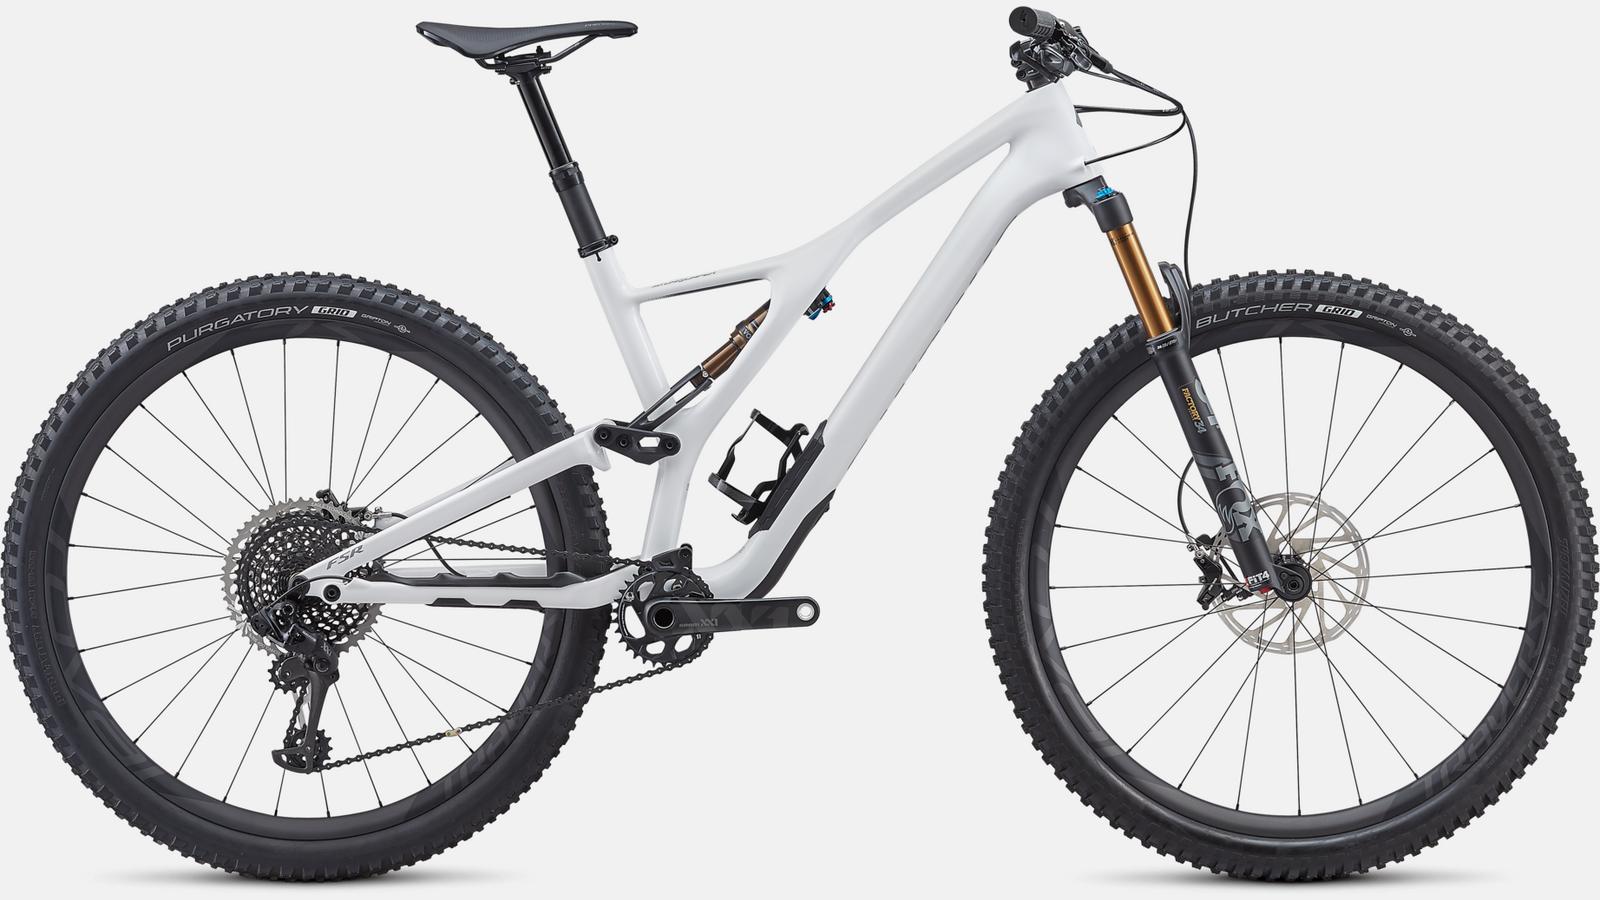 Paint for 2019 Specialized S-Works Stumpjumper ST 29 - Gloss White